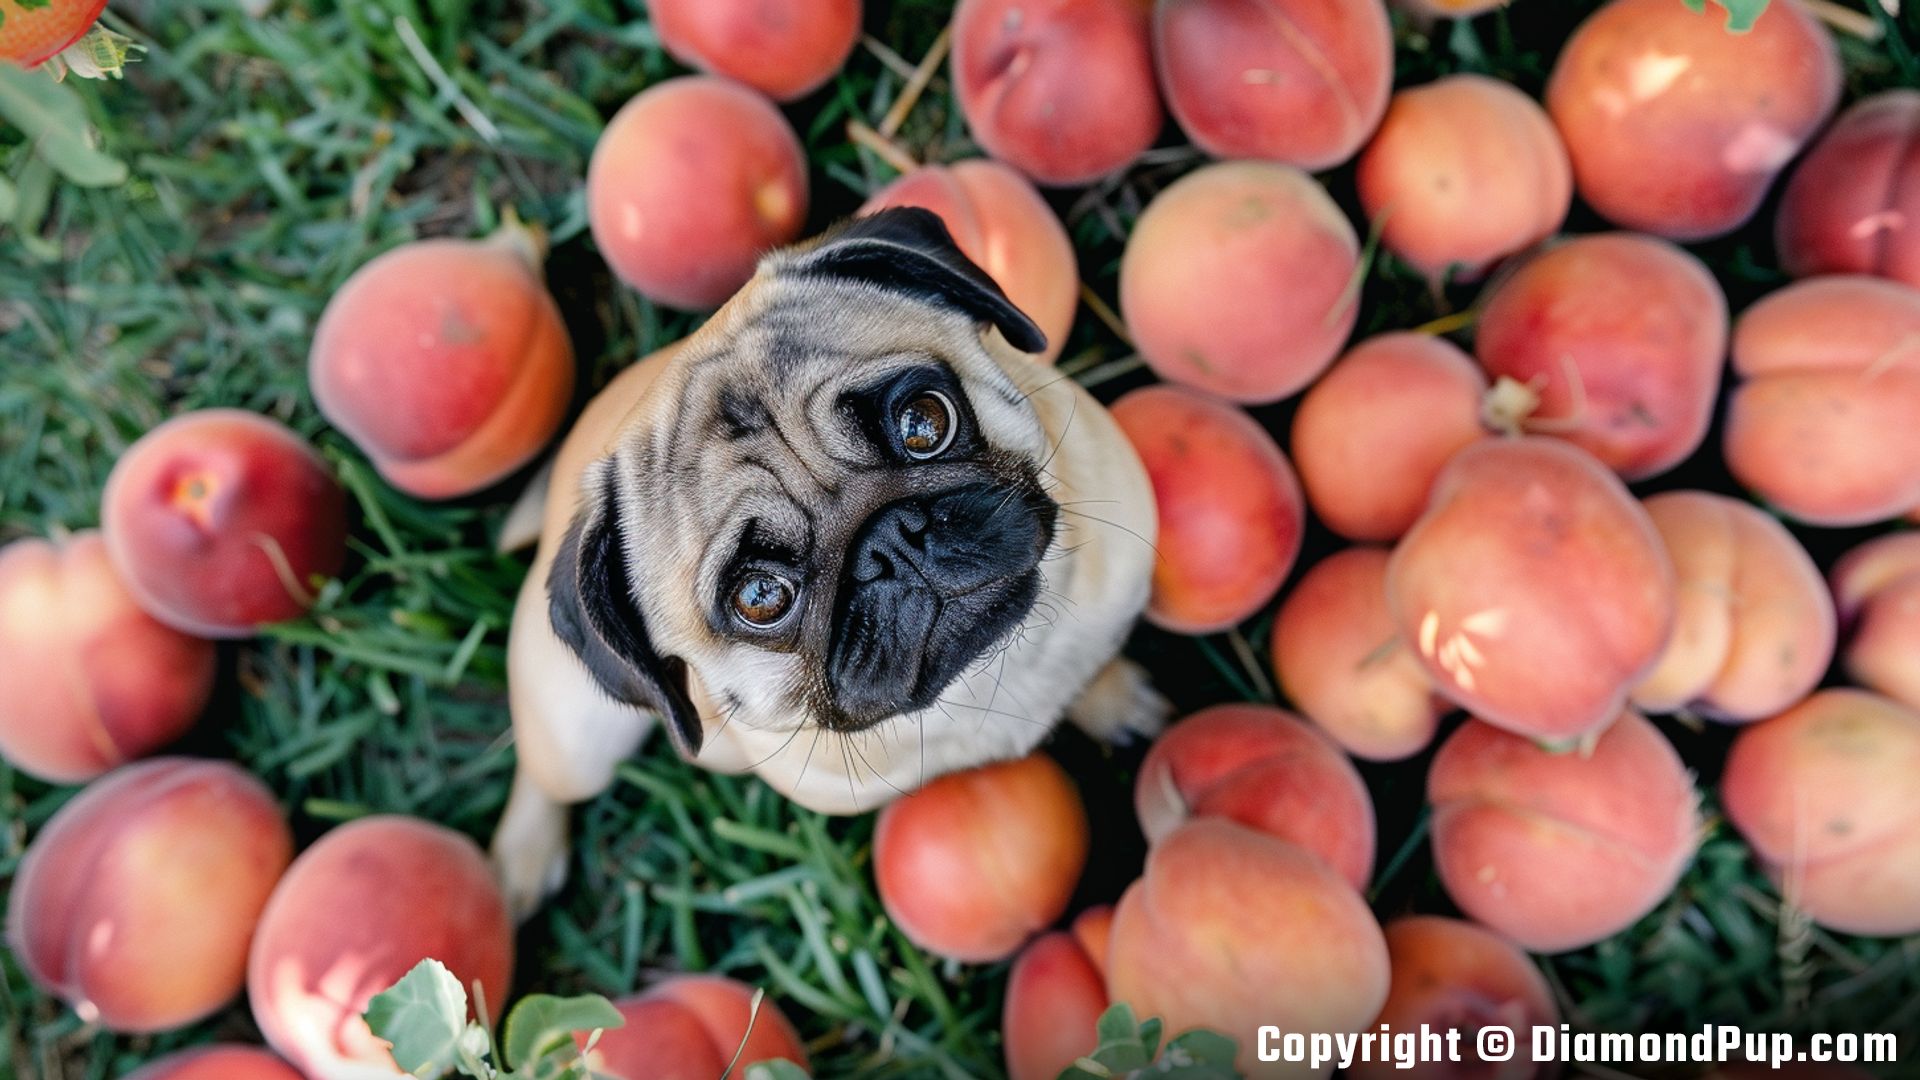 Photo of an Adorable Pug Snacking on Peaches